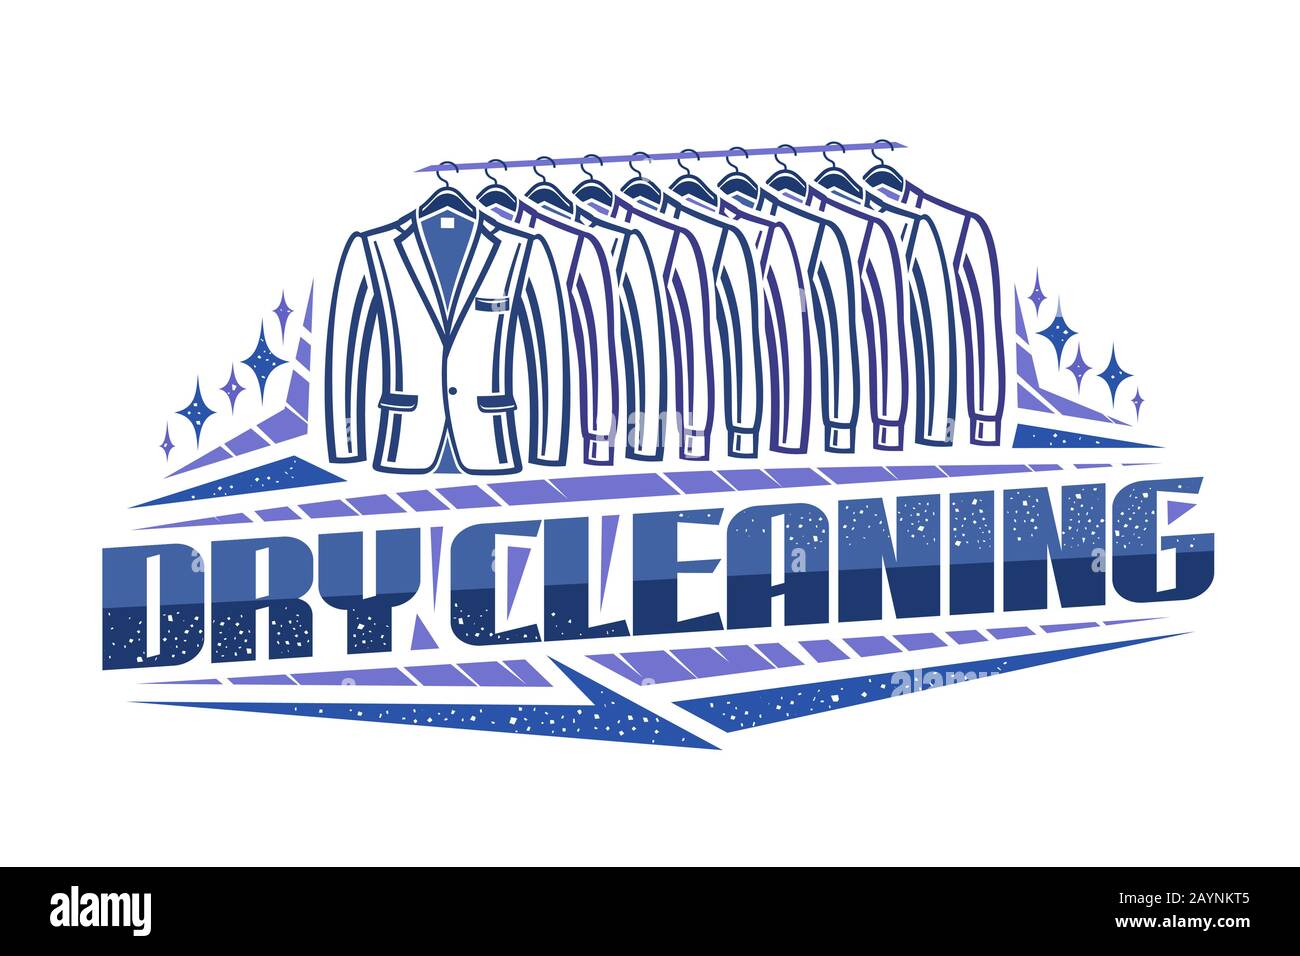 Vector logo for Dry Cleaning, blue decorative sign board with contour illustration of trendy tuxedos and shirts hanging on rack in a row, creative typ Stock Vector